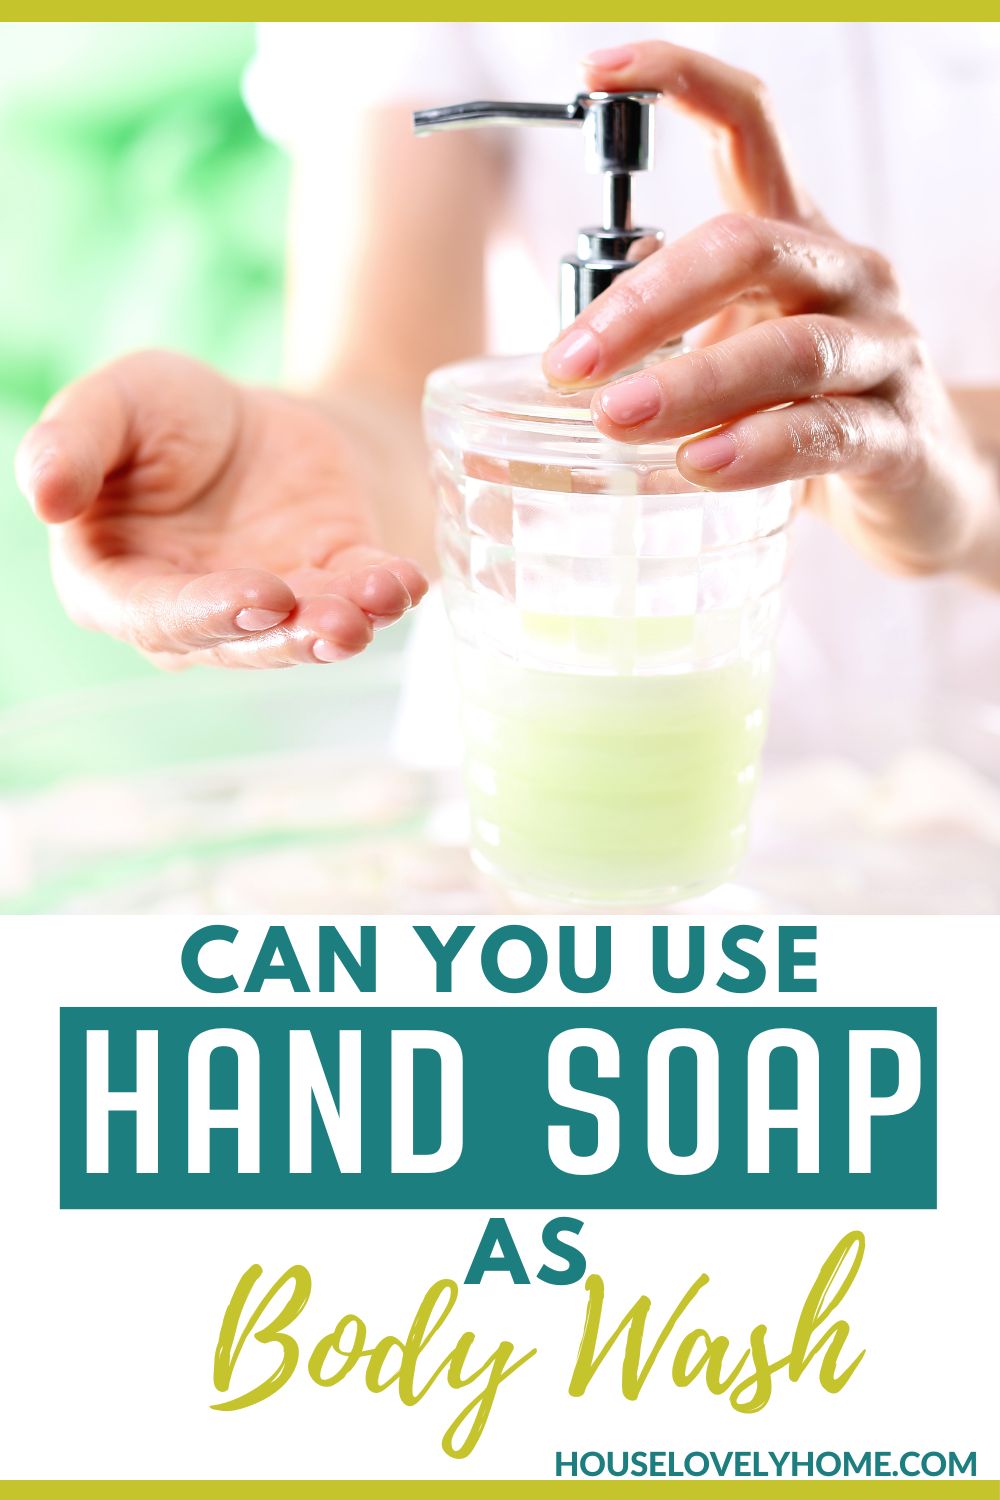 Image showing a liquid hand soap held by a hand and another hand with palm up and a text overlay that reads Can You Use Hand Soap as Body Wash